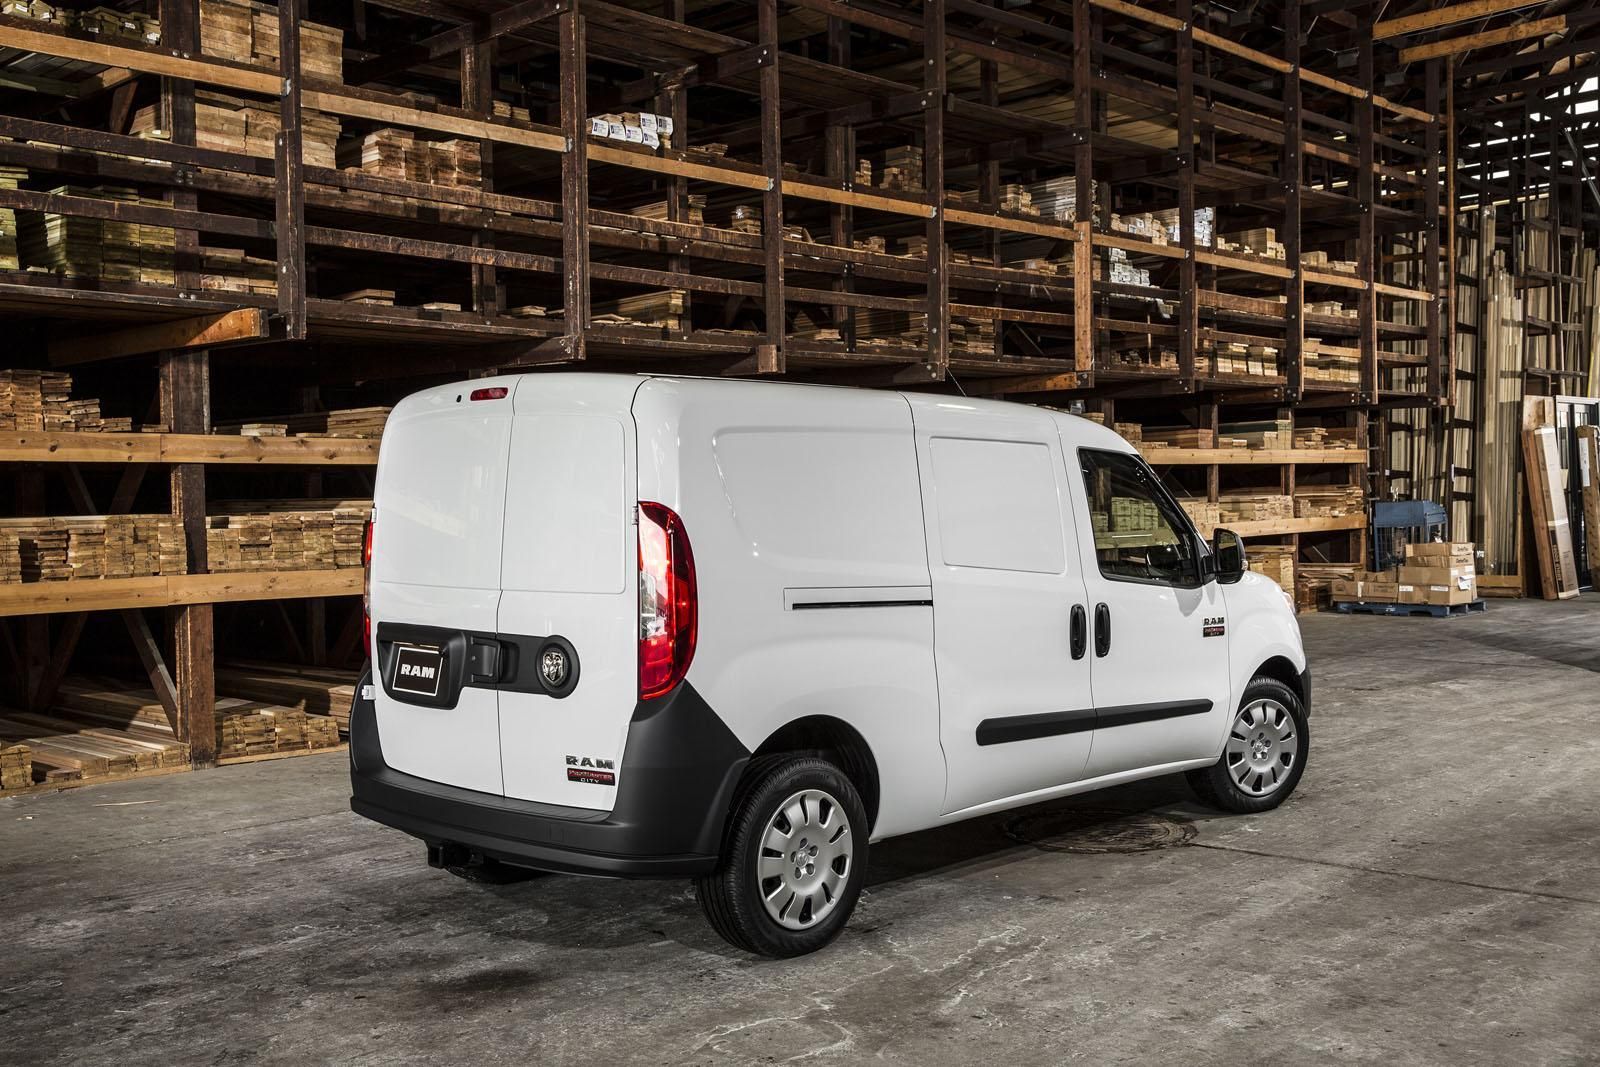 2015 RAM PROMASTER CTY RESM GALERS